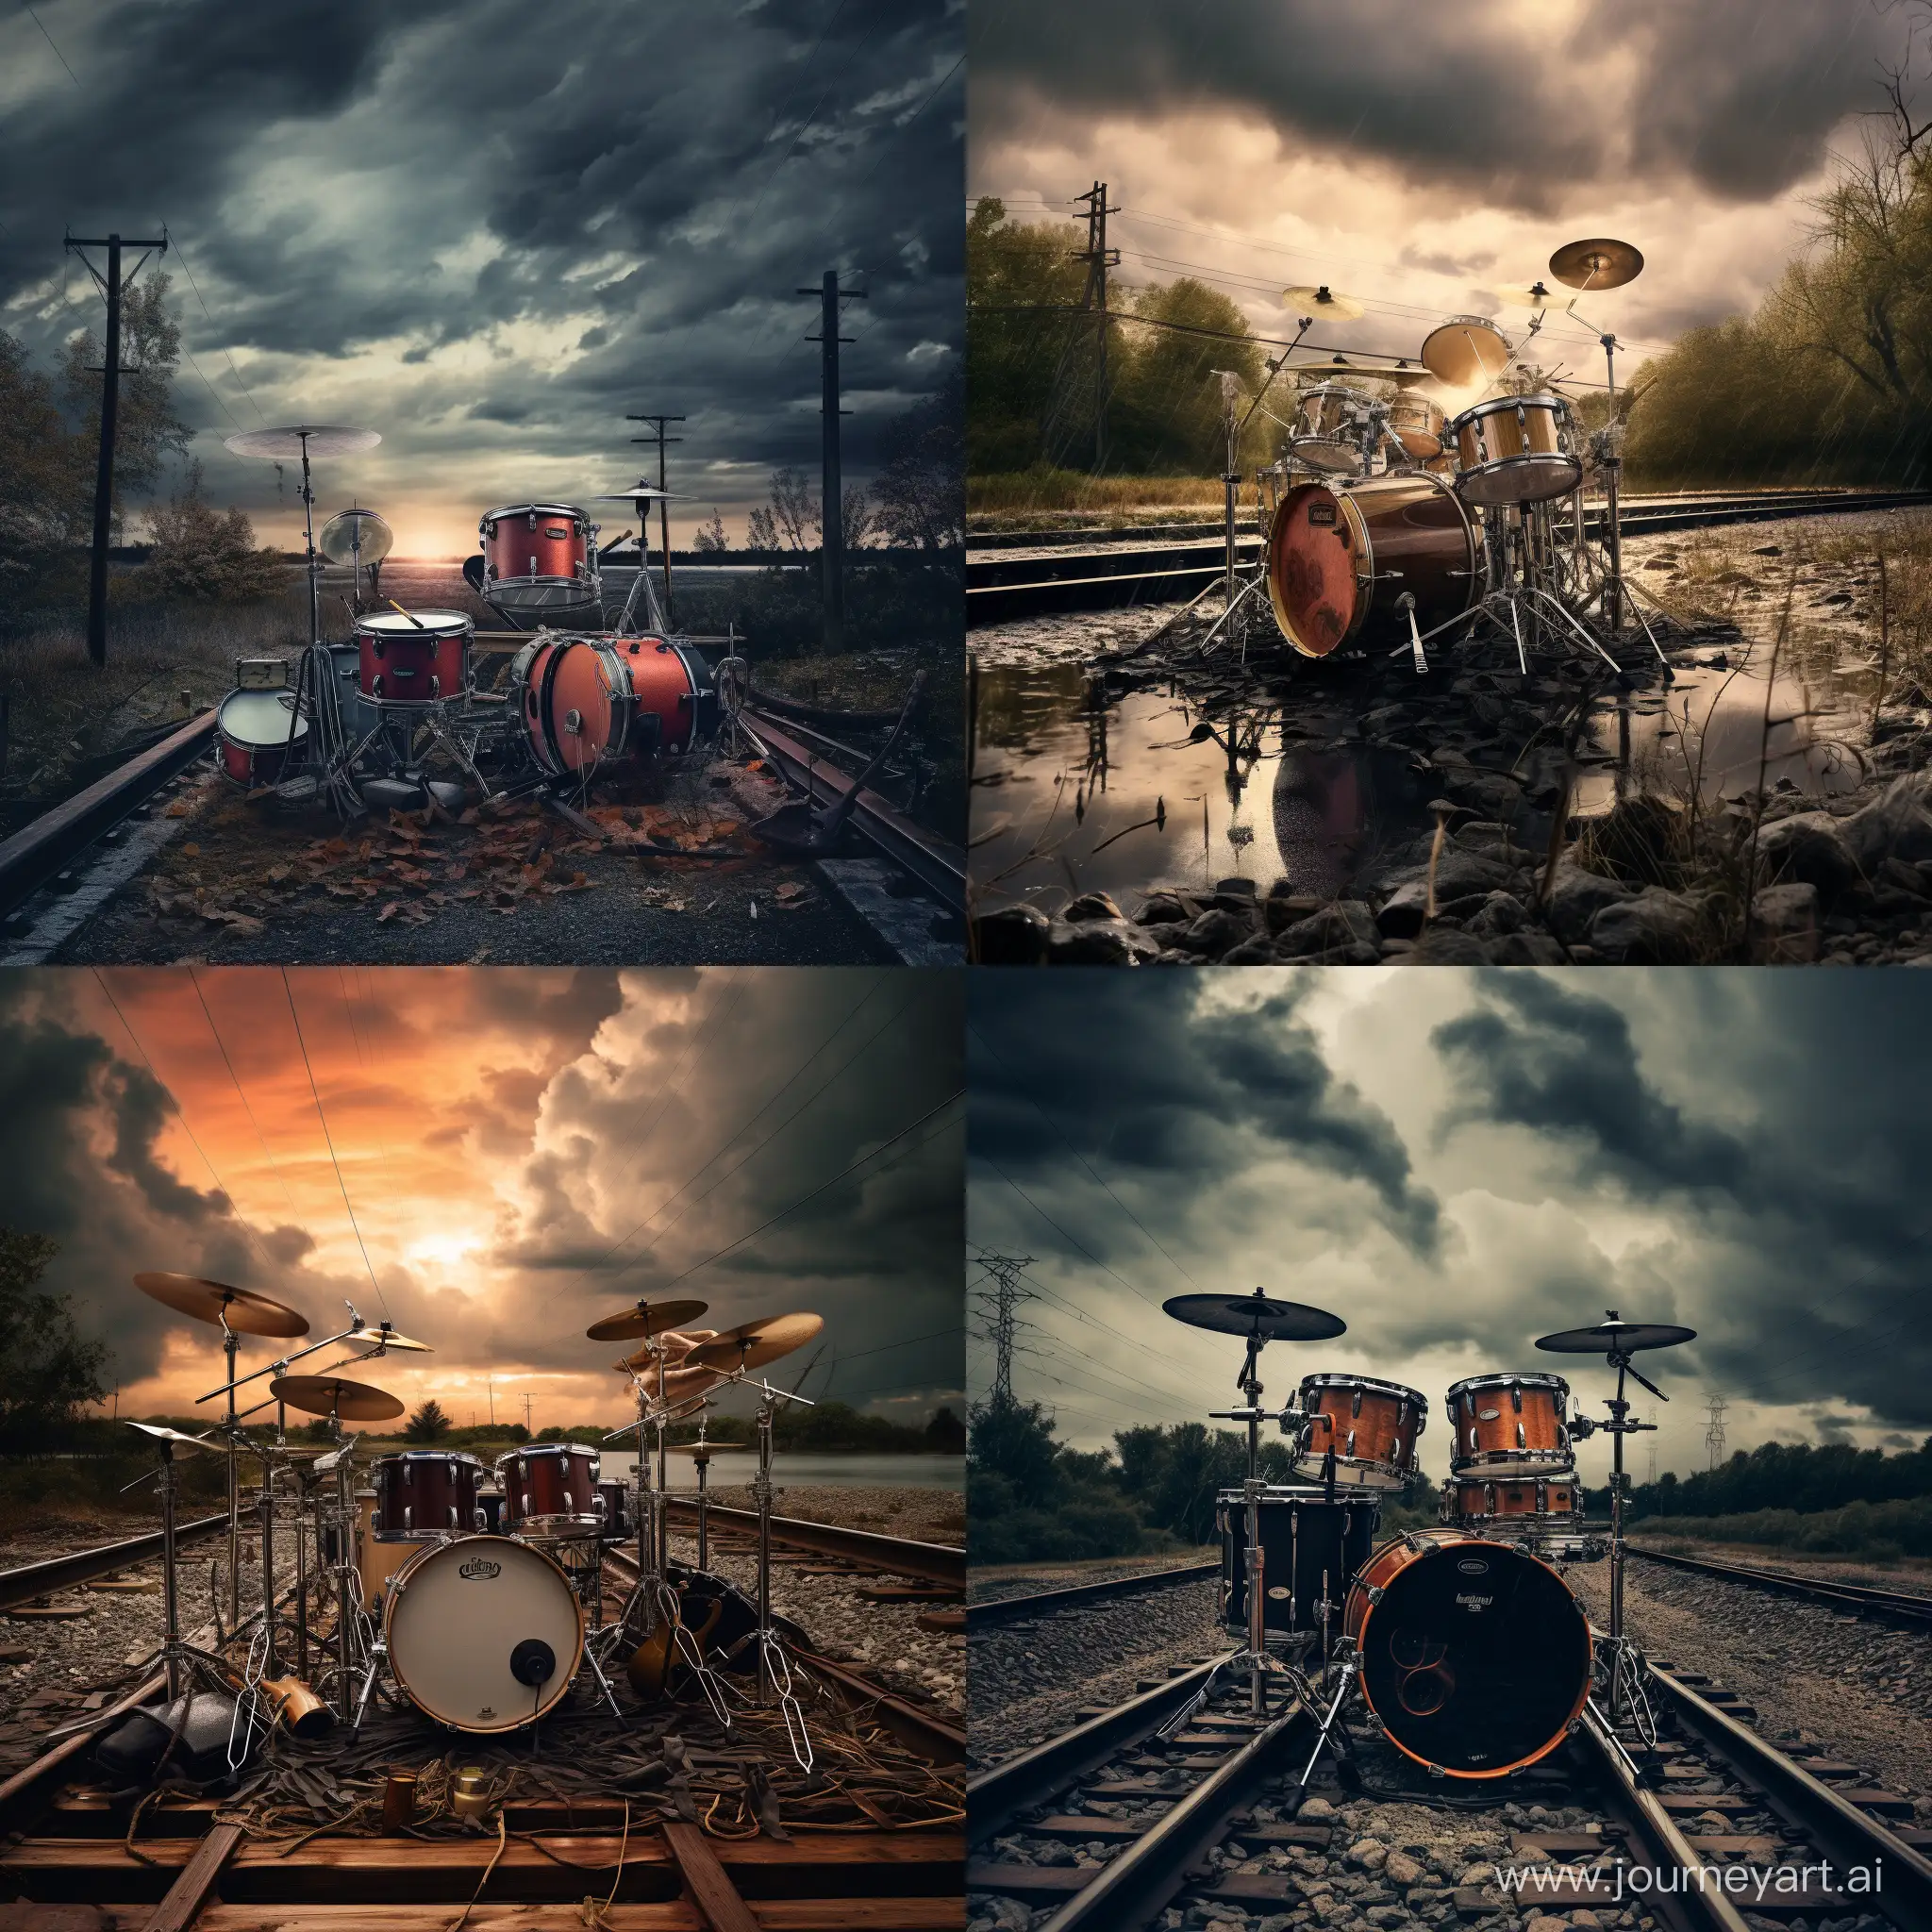 Drum-Kit-on-Moving-Train-with-Stormy-Sky